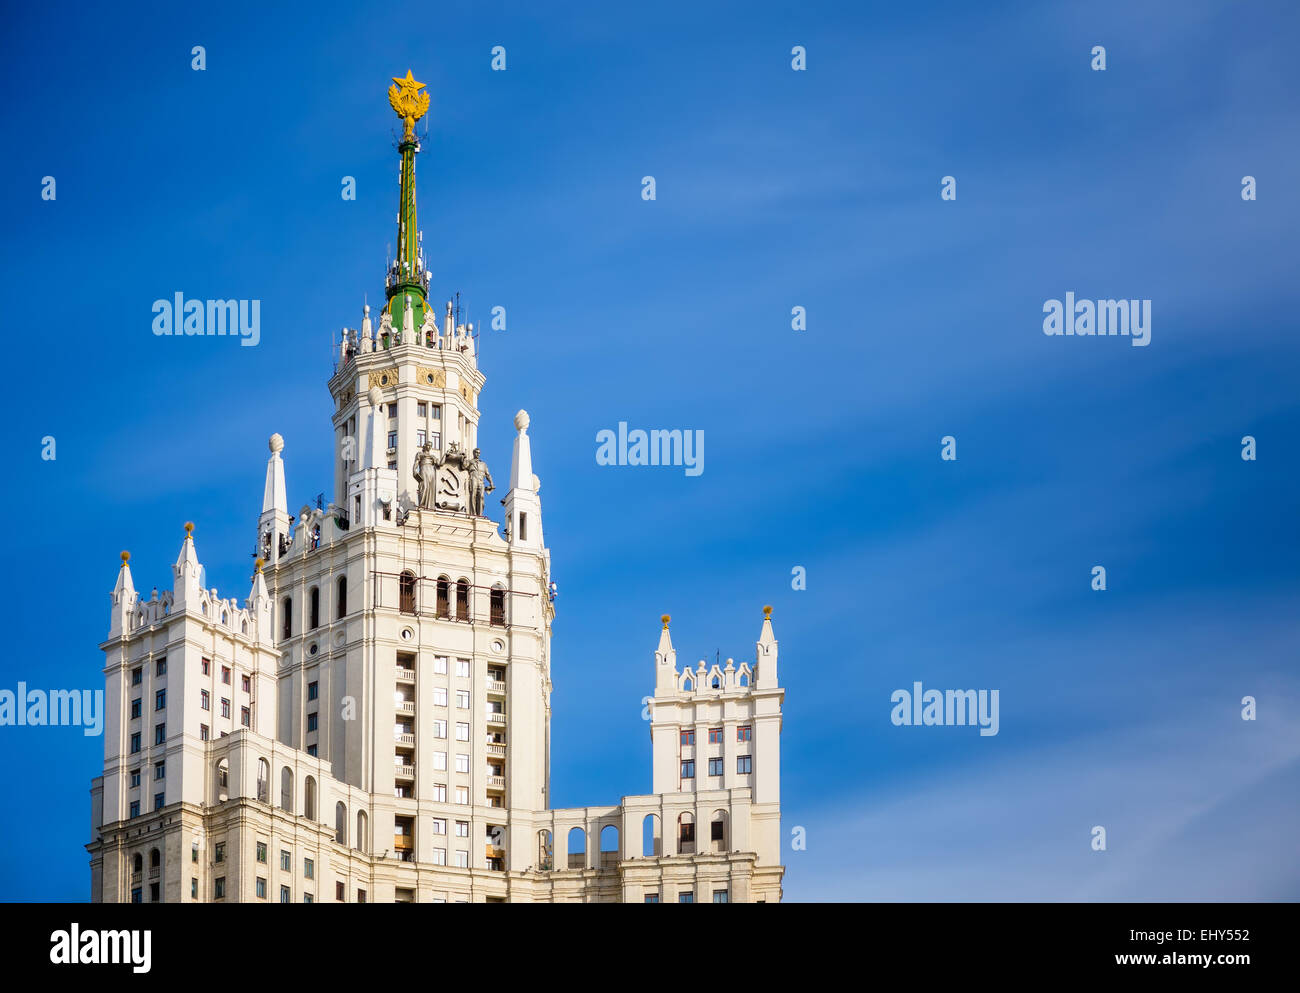 The tower and spire of the Kotelnicheskaya skyscraper on the sky background in Moscow, Russia Stock Photo